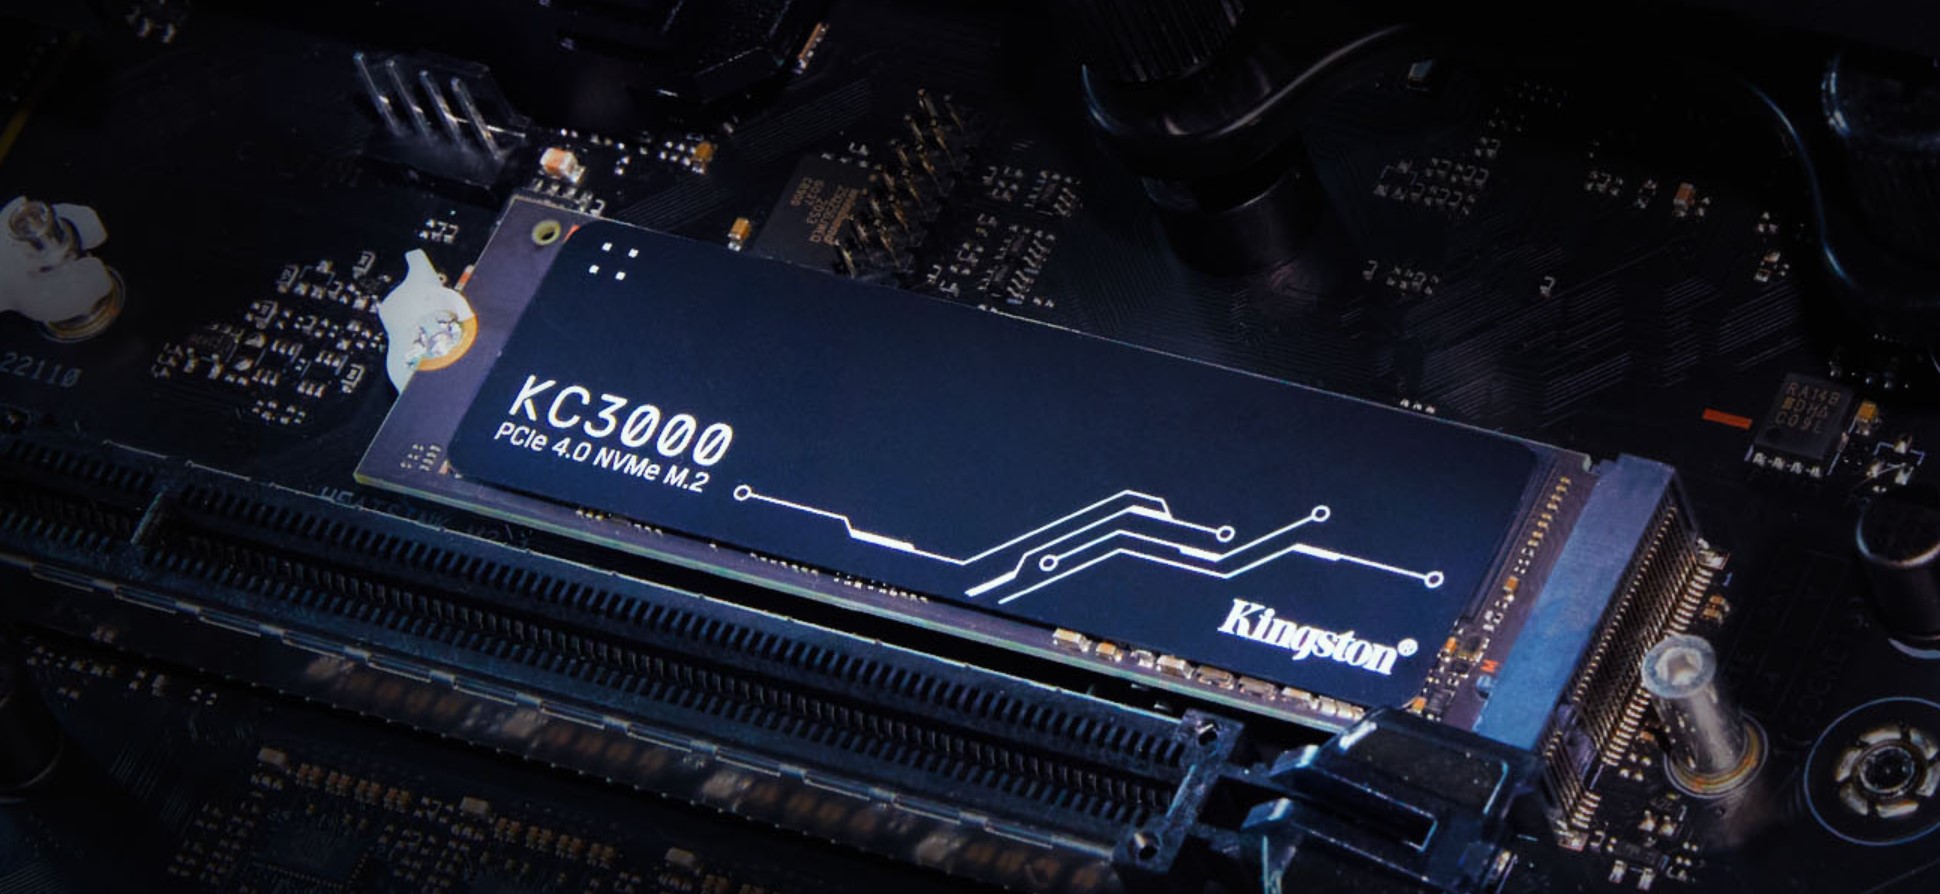 Kingston KC3000 PCIe 4.0 NVMe SSD is flaming fast (storage review)